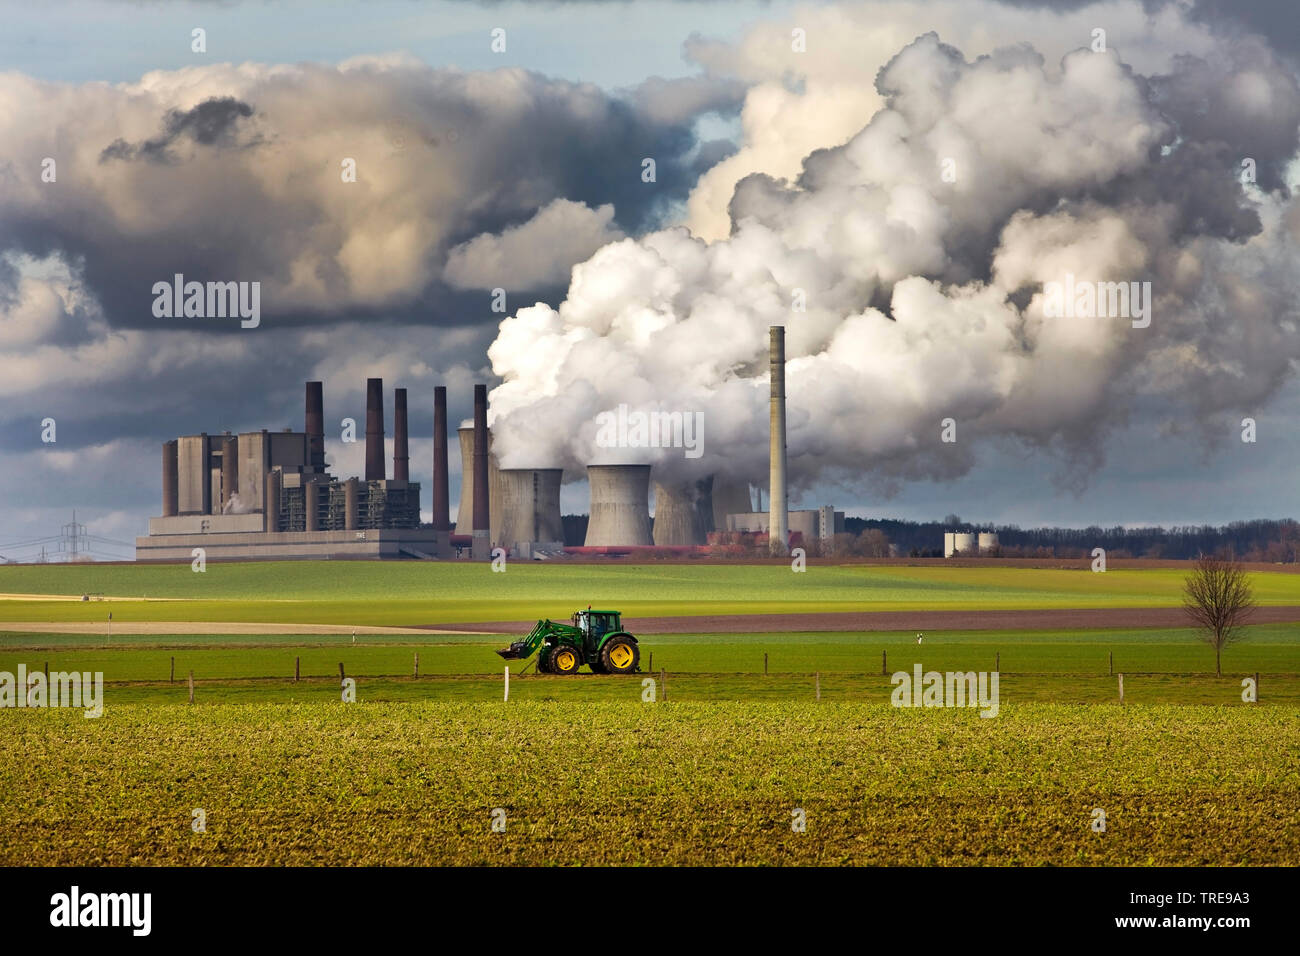 tractor in field scenery in front of brown coal power station Frimmersdorf, Germany, North Rhine-Westphalia, Bergheim, Grevenbroich Stock Photo